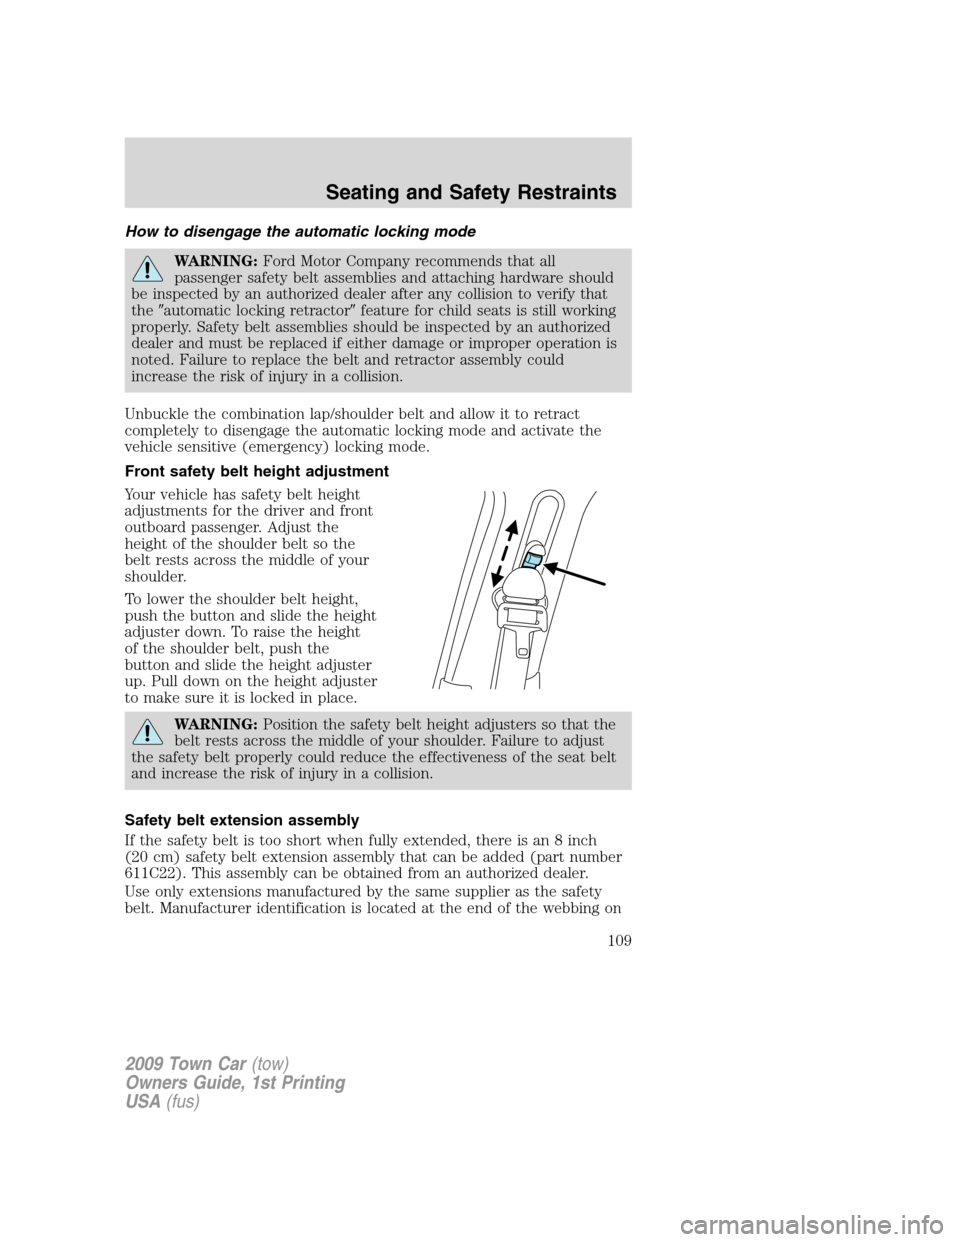 LINCOLN TOWN CAR 2009  Owners Manual How to disengage the automatic locking mode
WARNING:Ford Motor Company recommends that all
passenger safety belt assemblies and attaching hardware should
be inspected by an authorized dealer after any